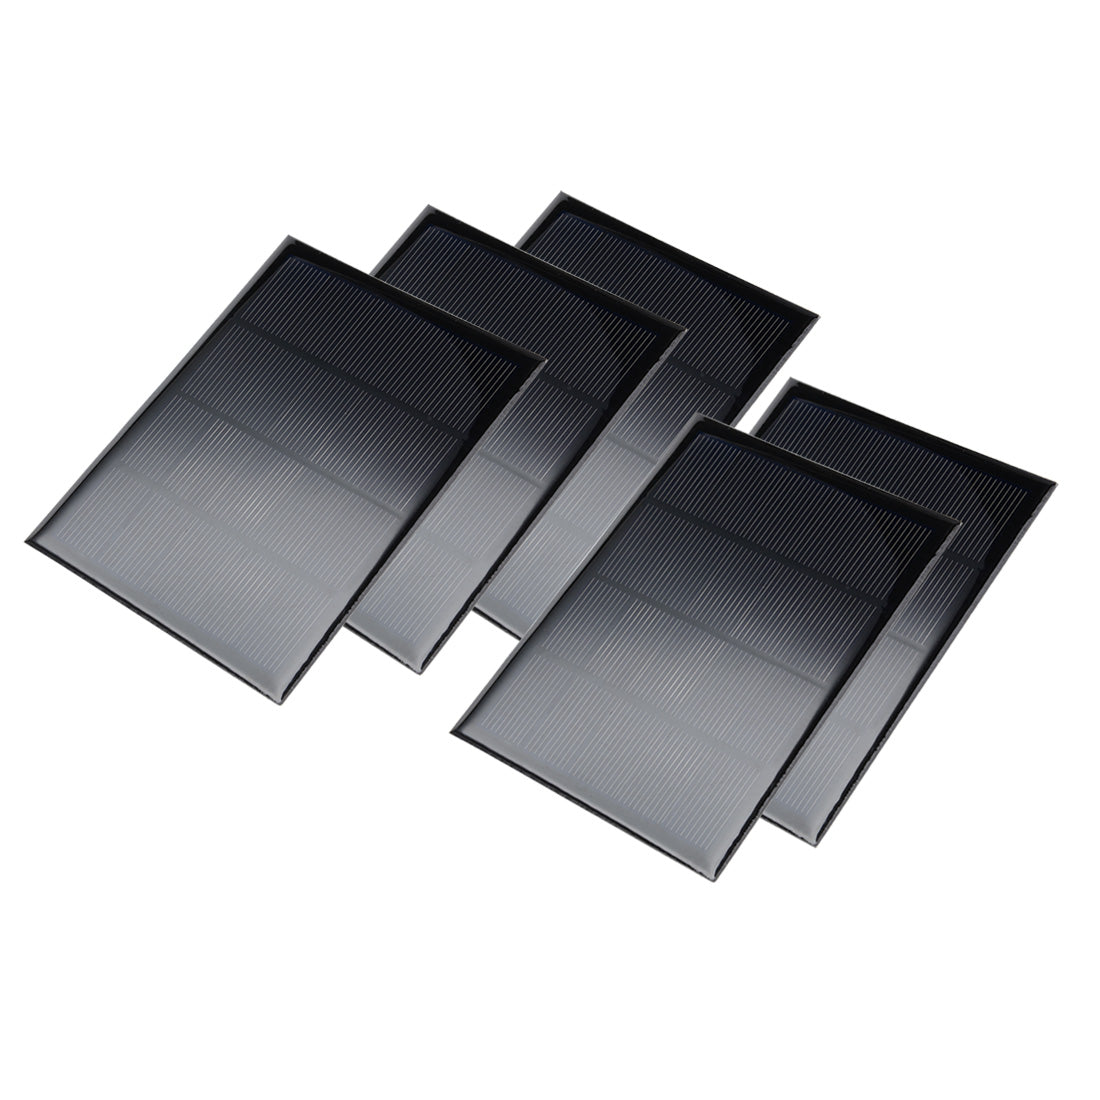 uxcell Uxcell 5Pcs 5V 300mA Poly Mini Solar Cell Panel Module DIY for Light Toys Charger 104mm x 140mm